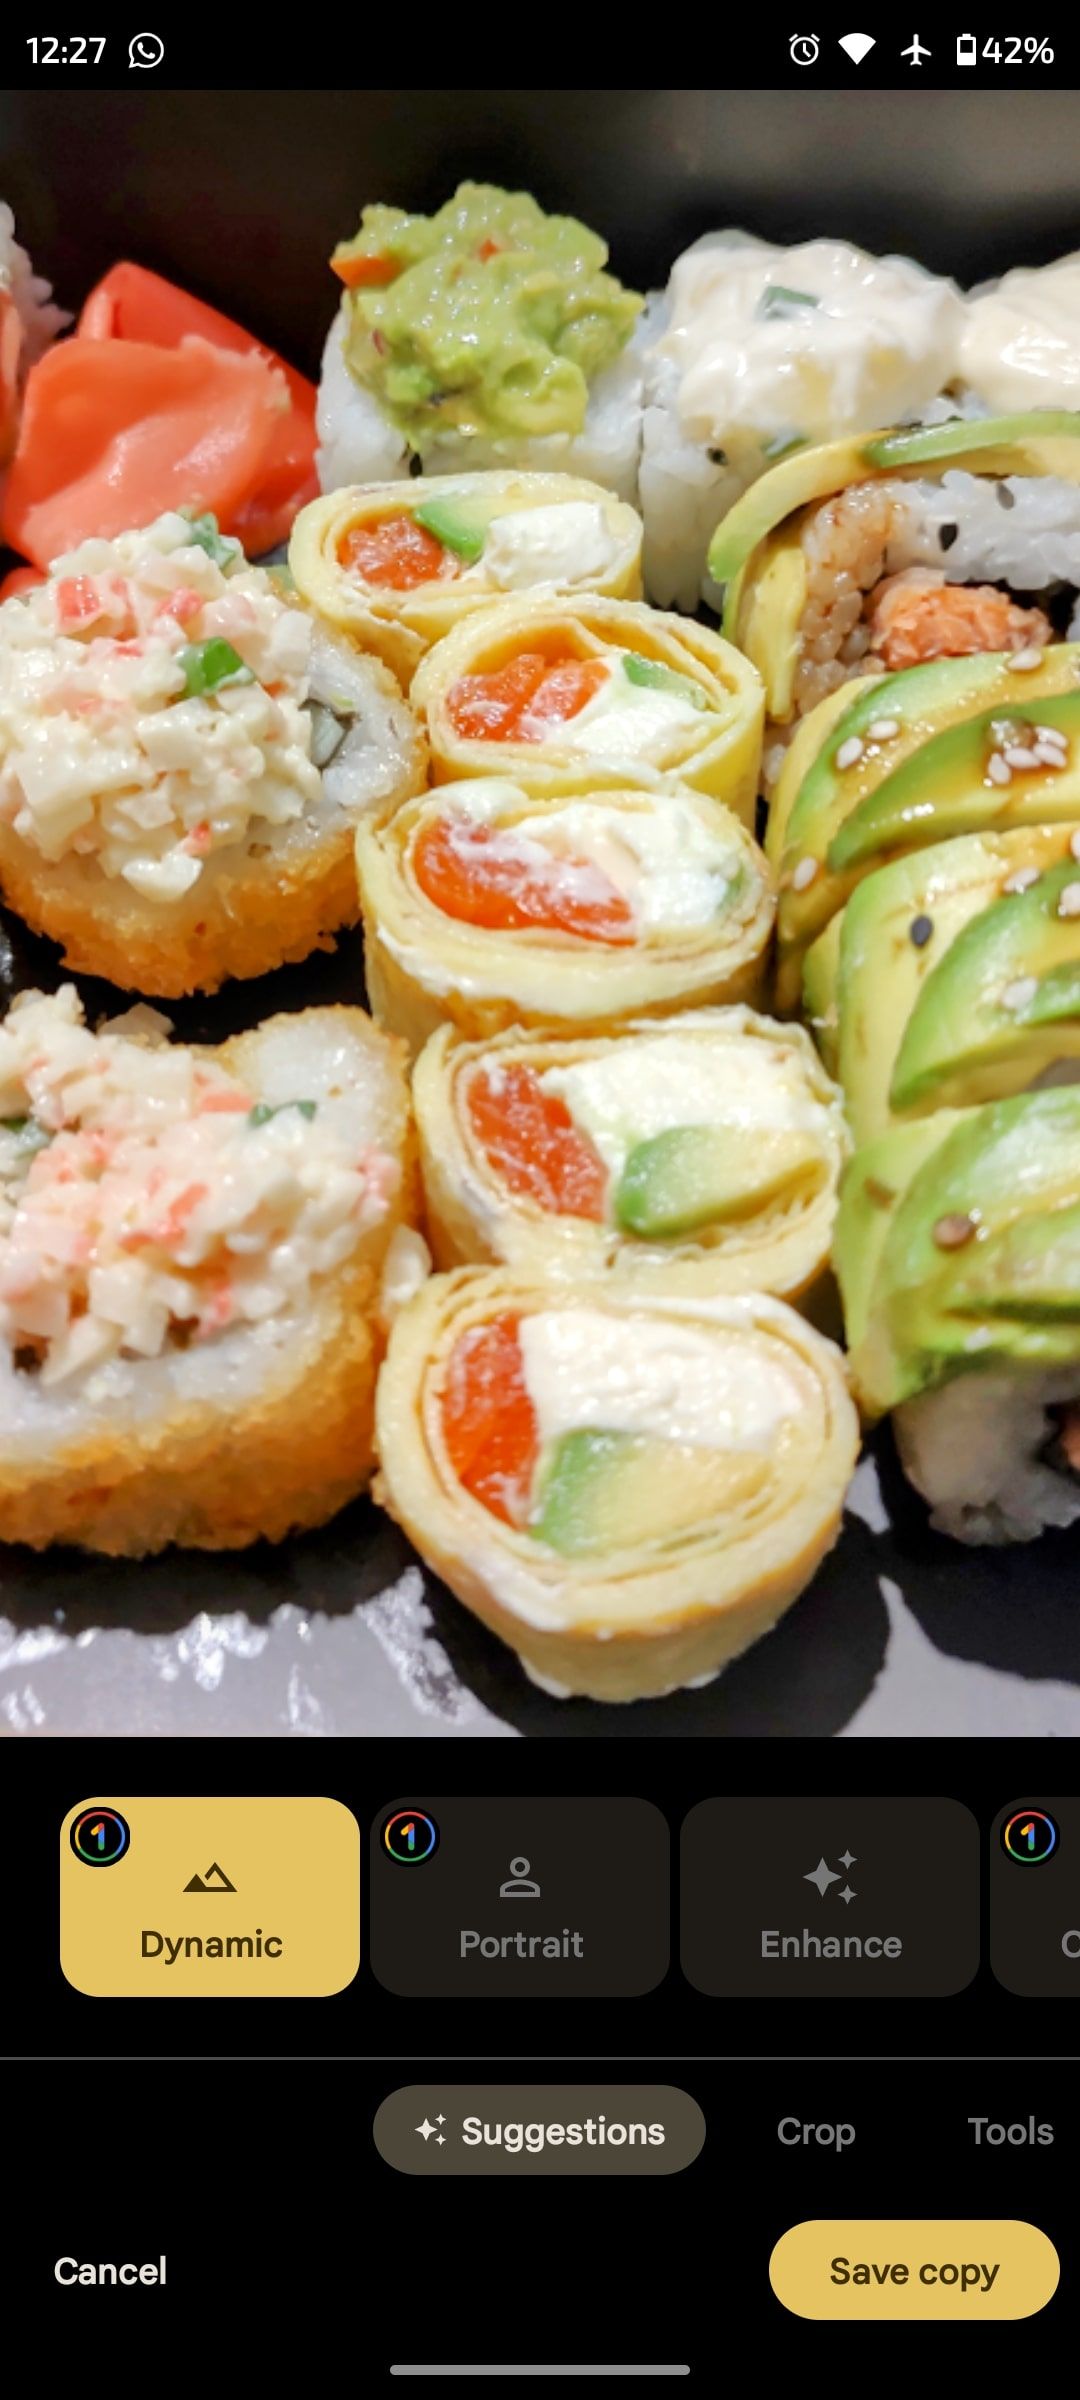 Dynamic filter applied to picture of sushi